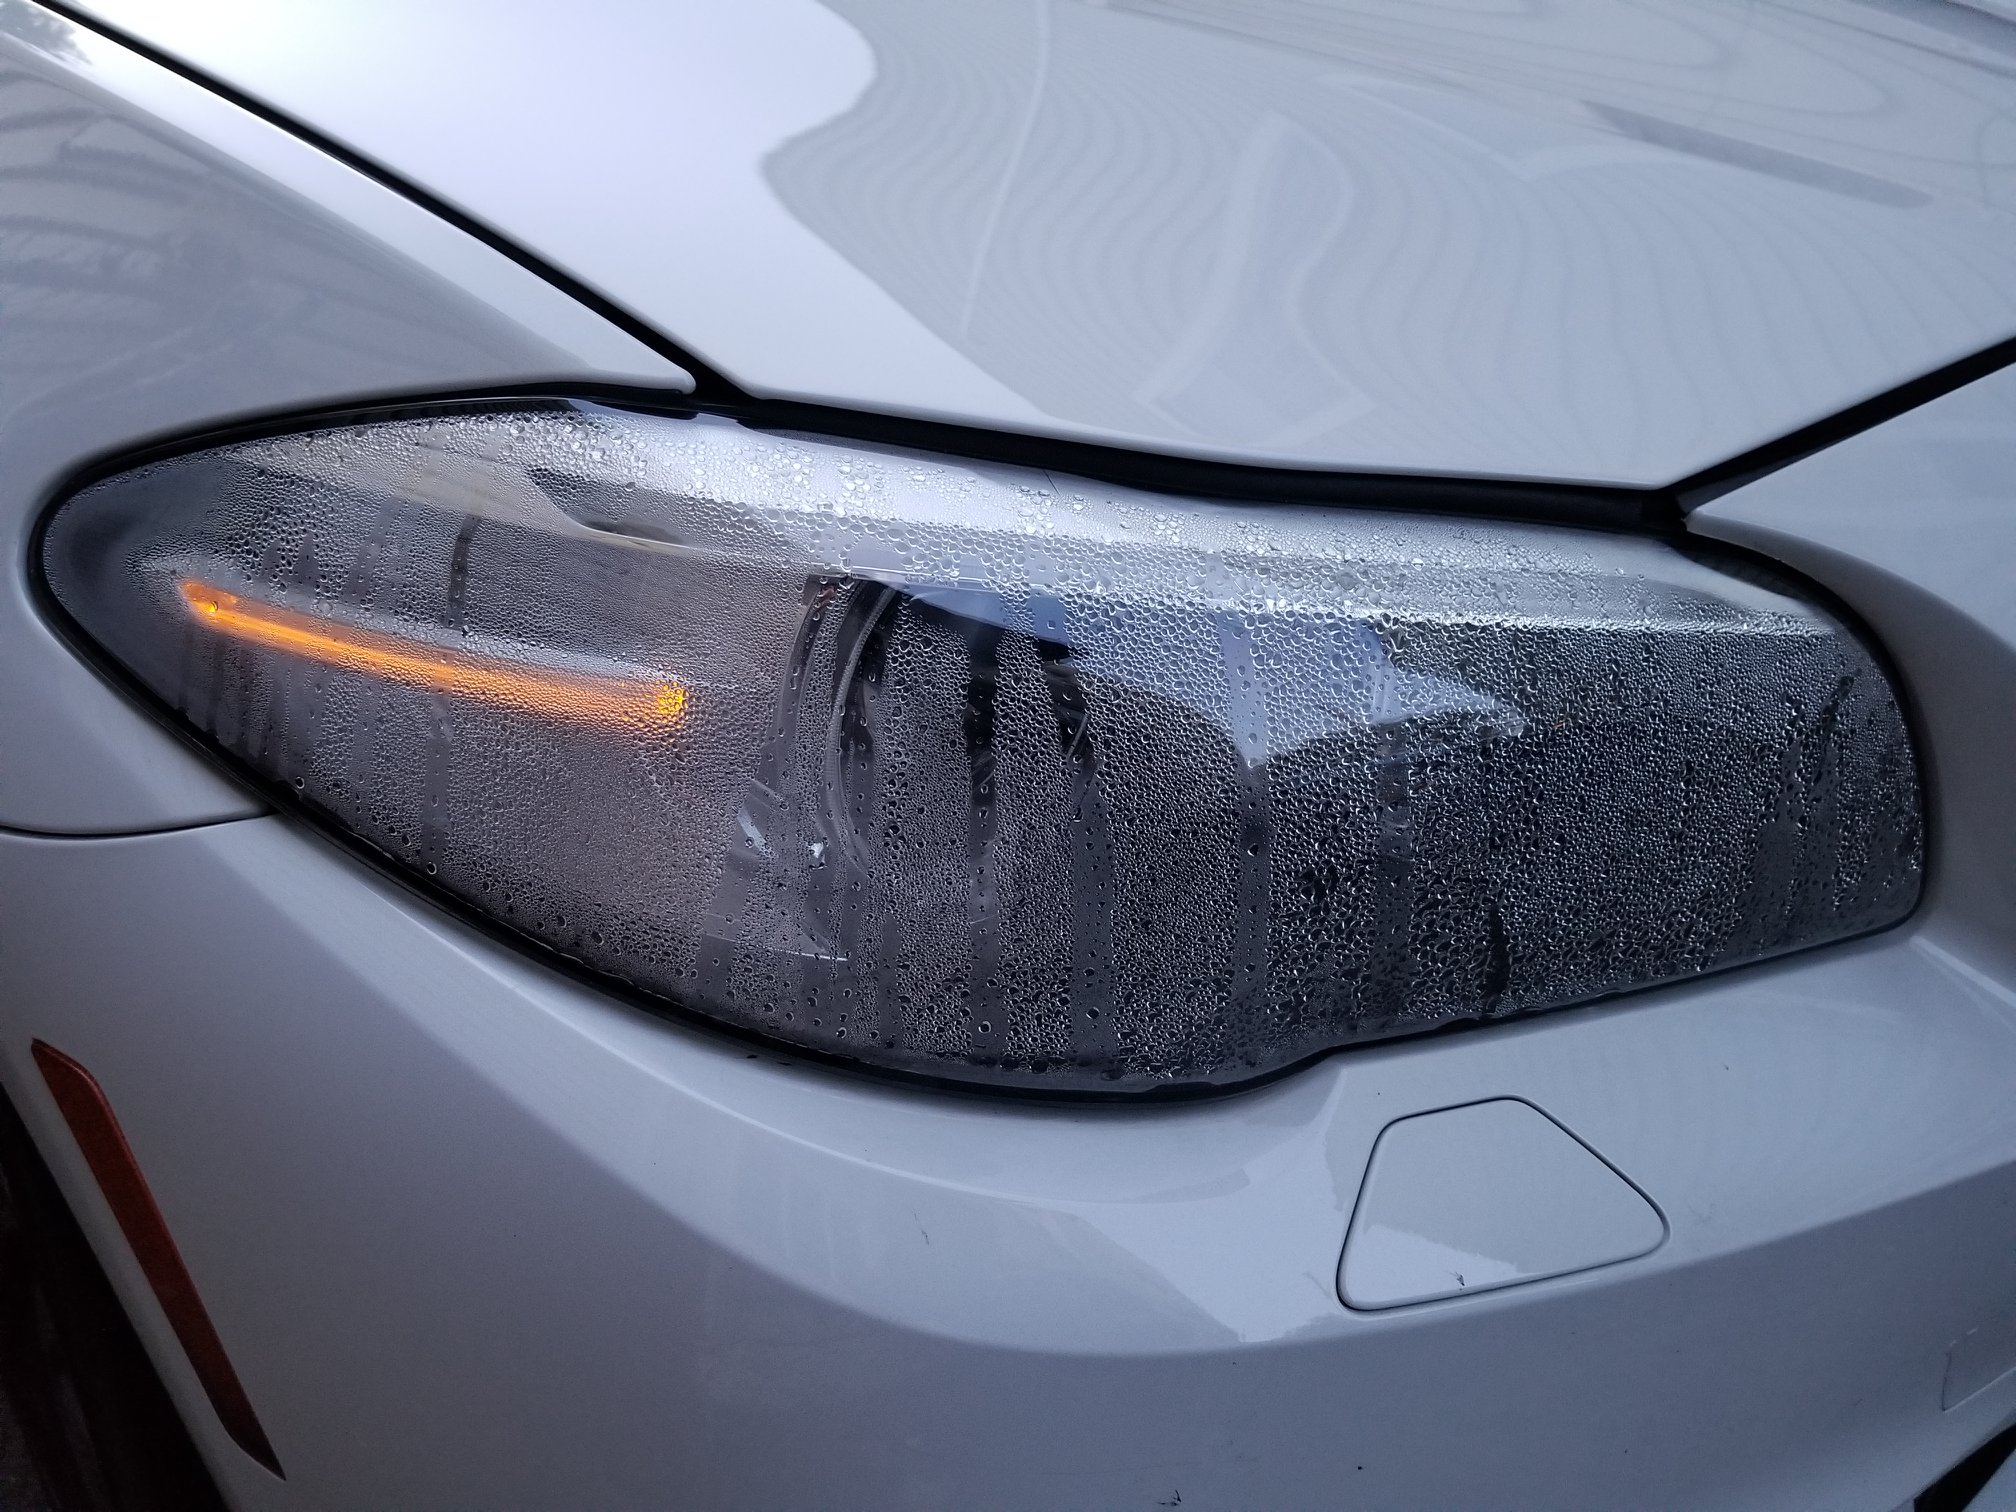 Excess amount of condensation in headlight